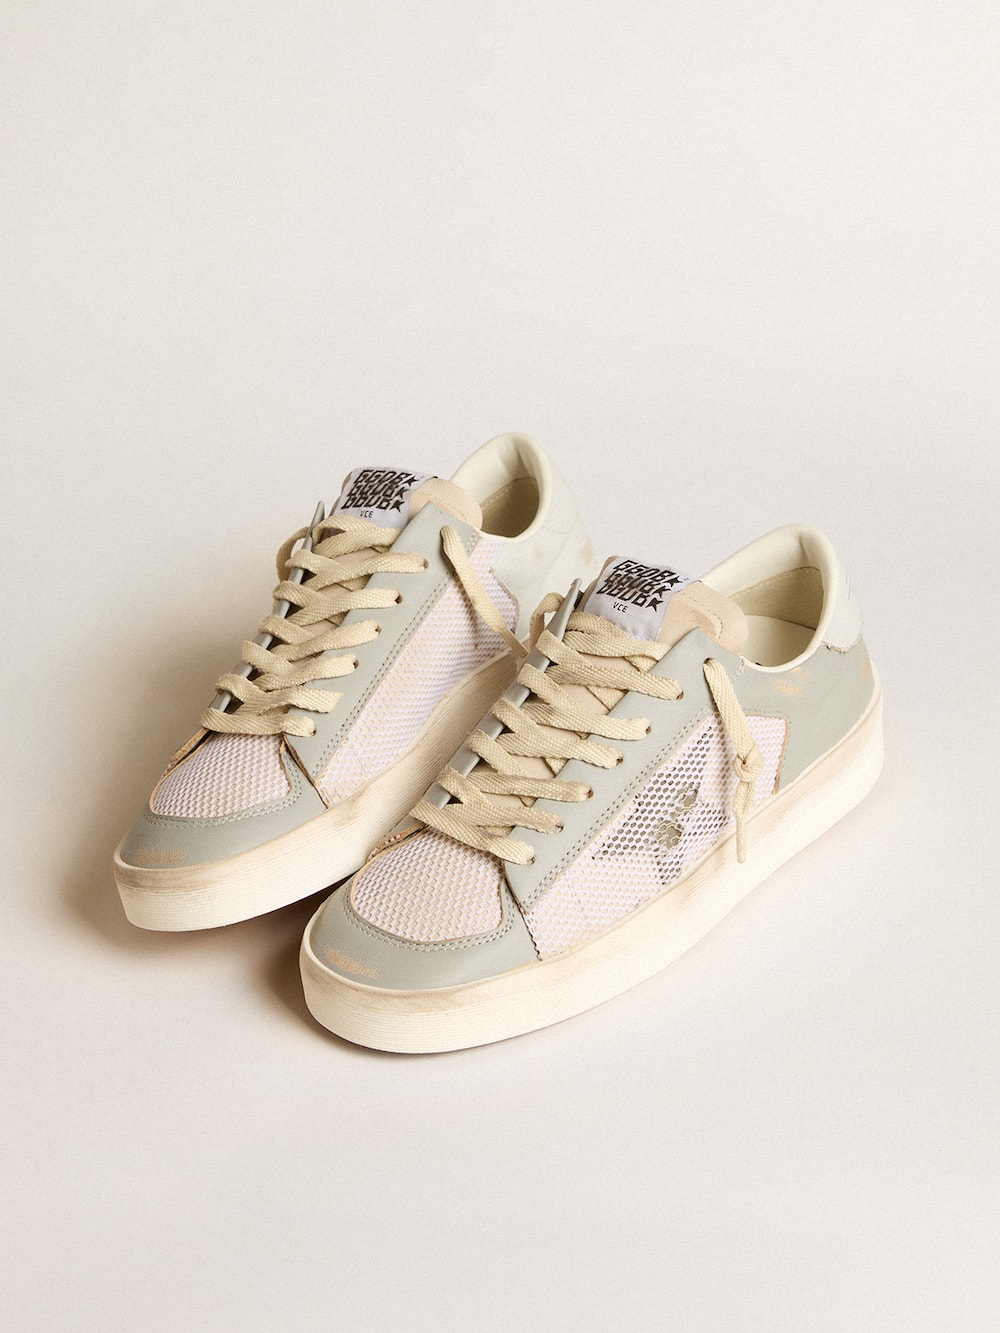 Golden Goose - Stardan in gray nappa leather and white mesh with gray leather star in 